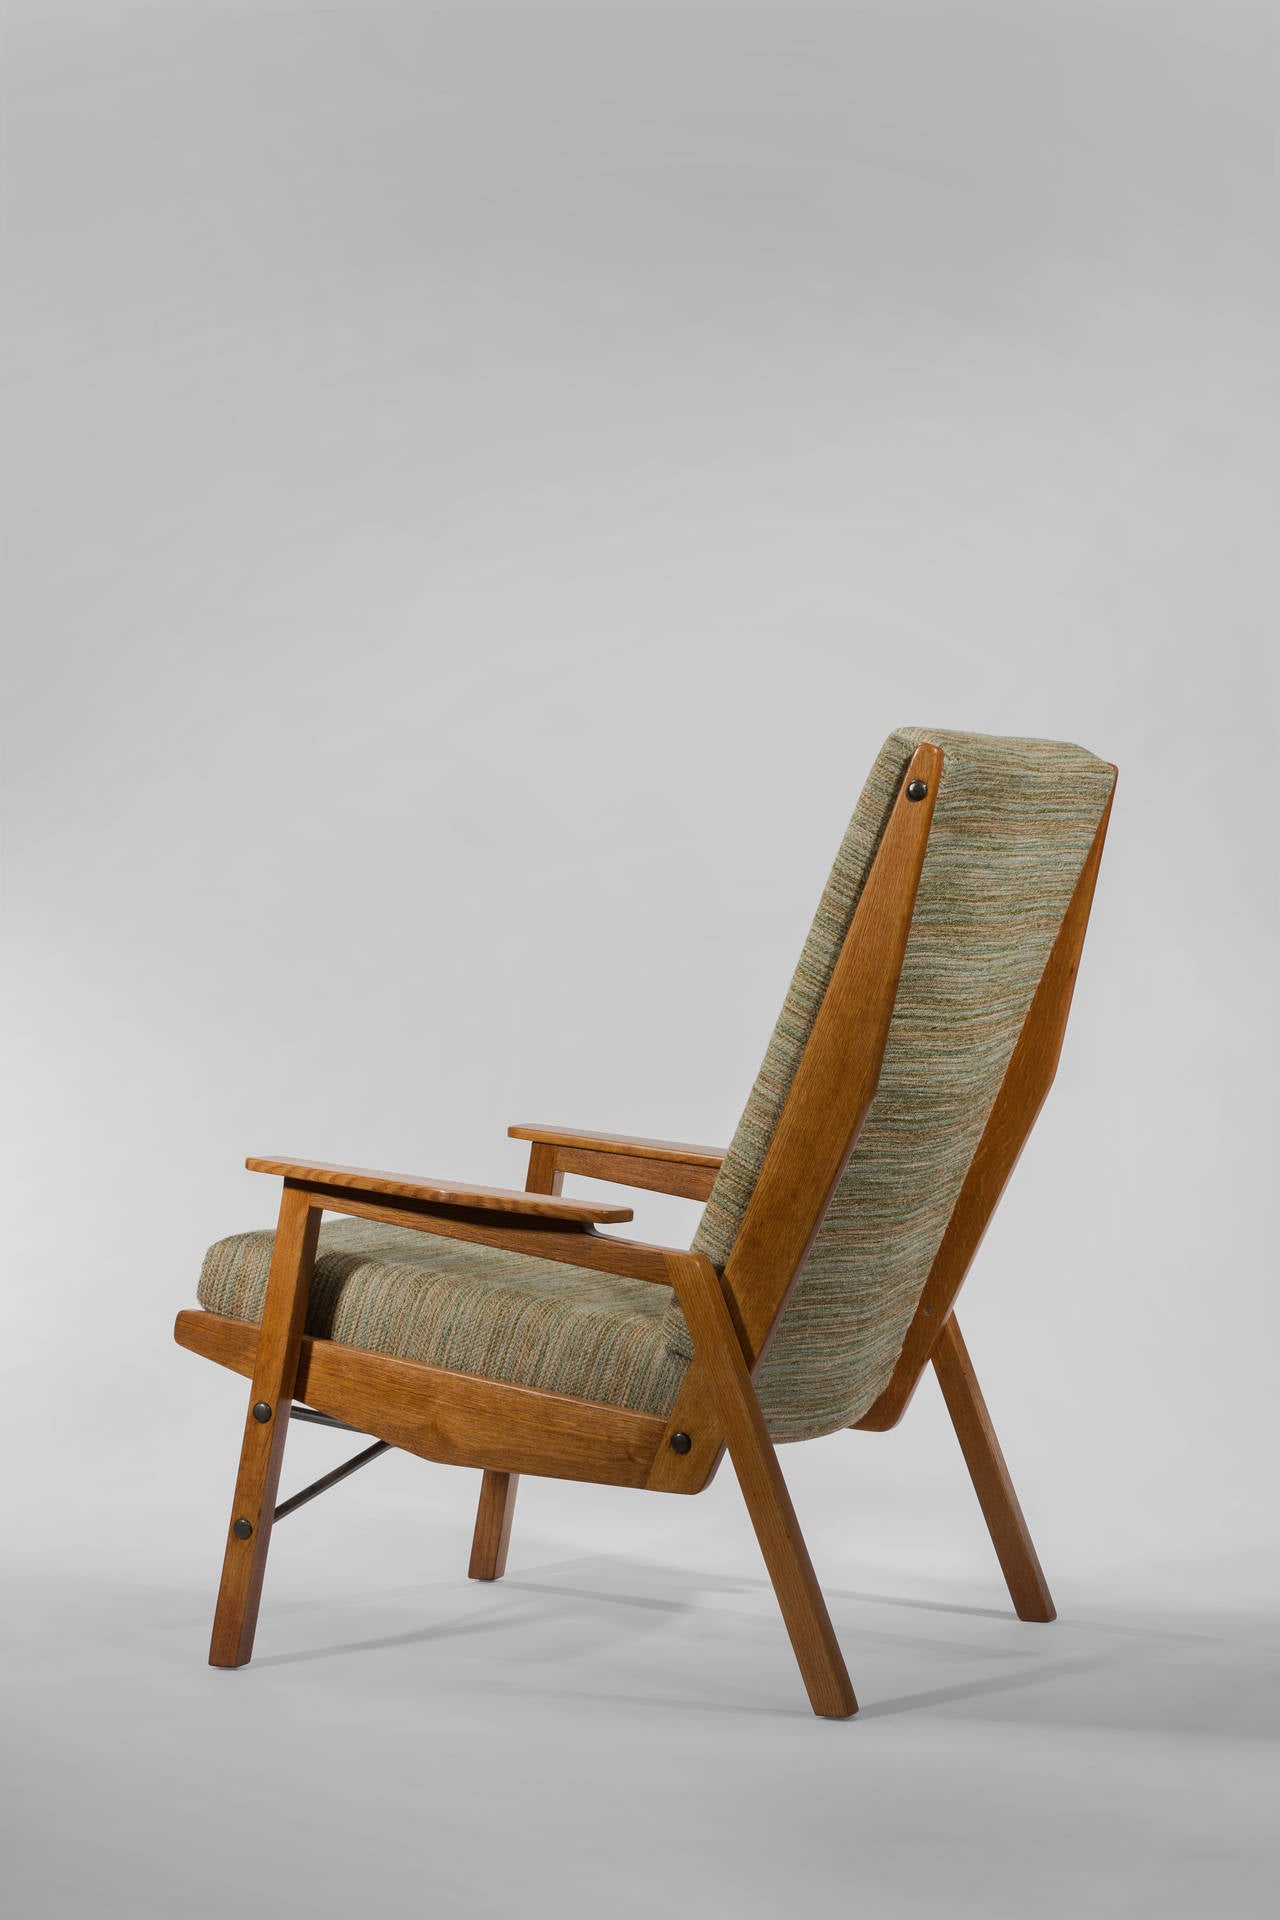 Pair of A340 armchairs by Rene´ Jean Caillette, designed in 1956 for Airborne. In excellent condition, recently reupholstered. 
(A single chair, is also available.)

About the designer: Rene´-Jean Caillette (1919–2004), was the son of a